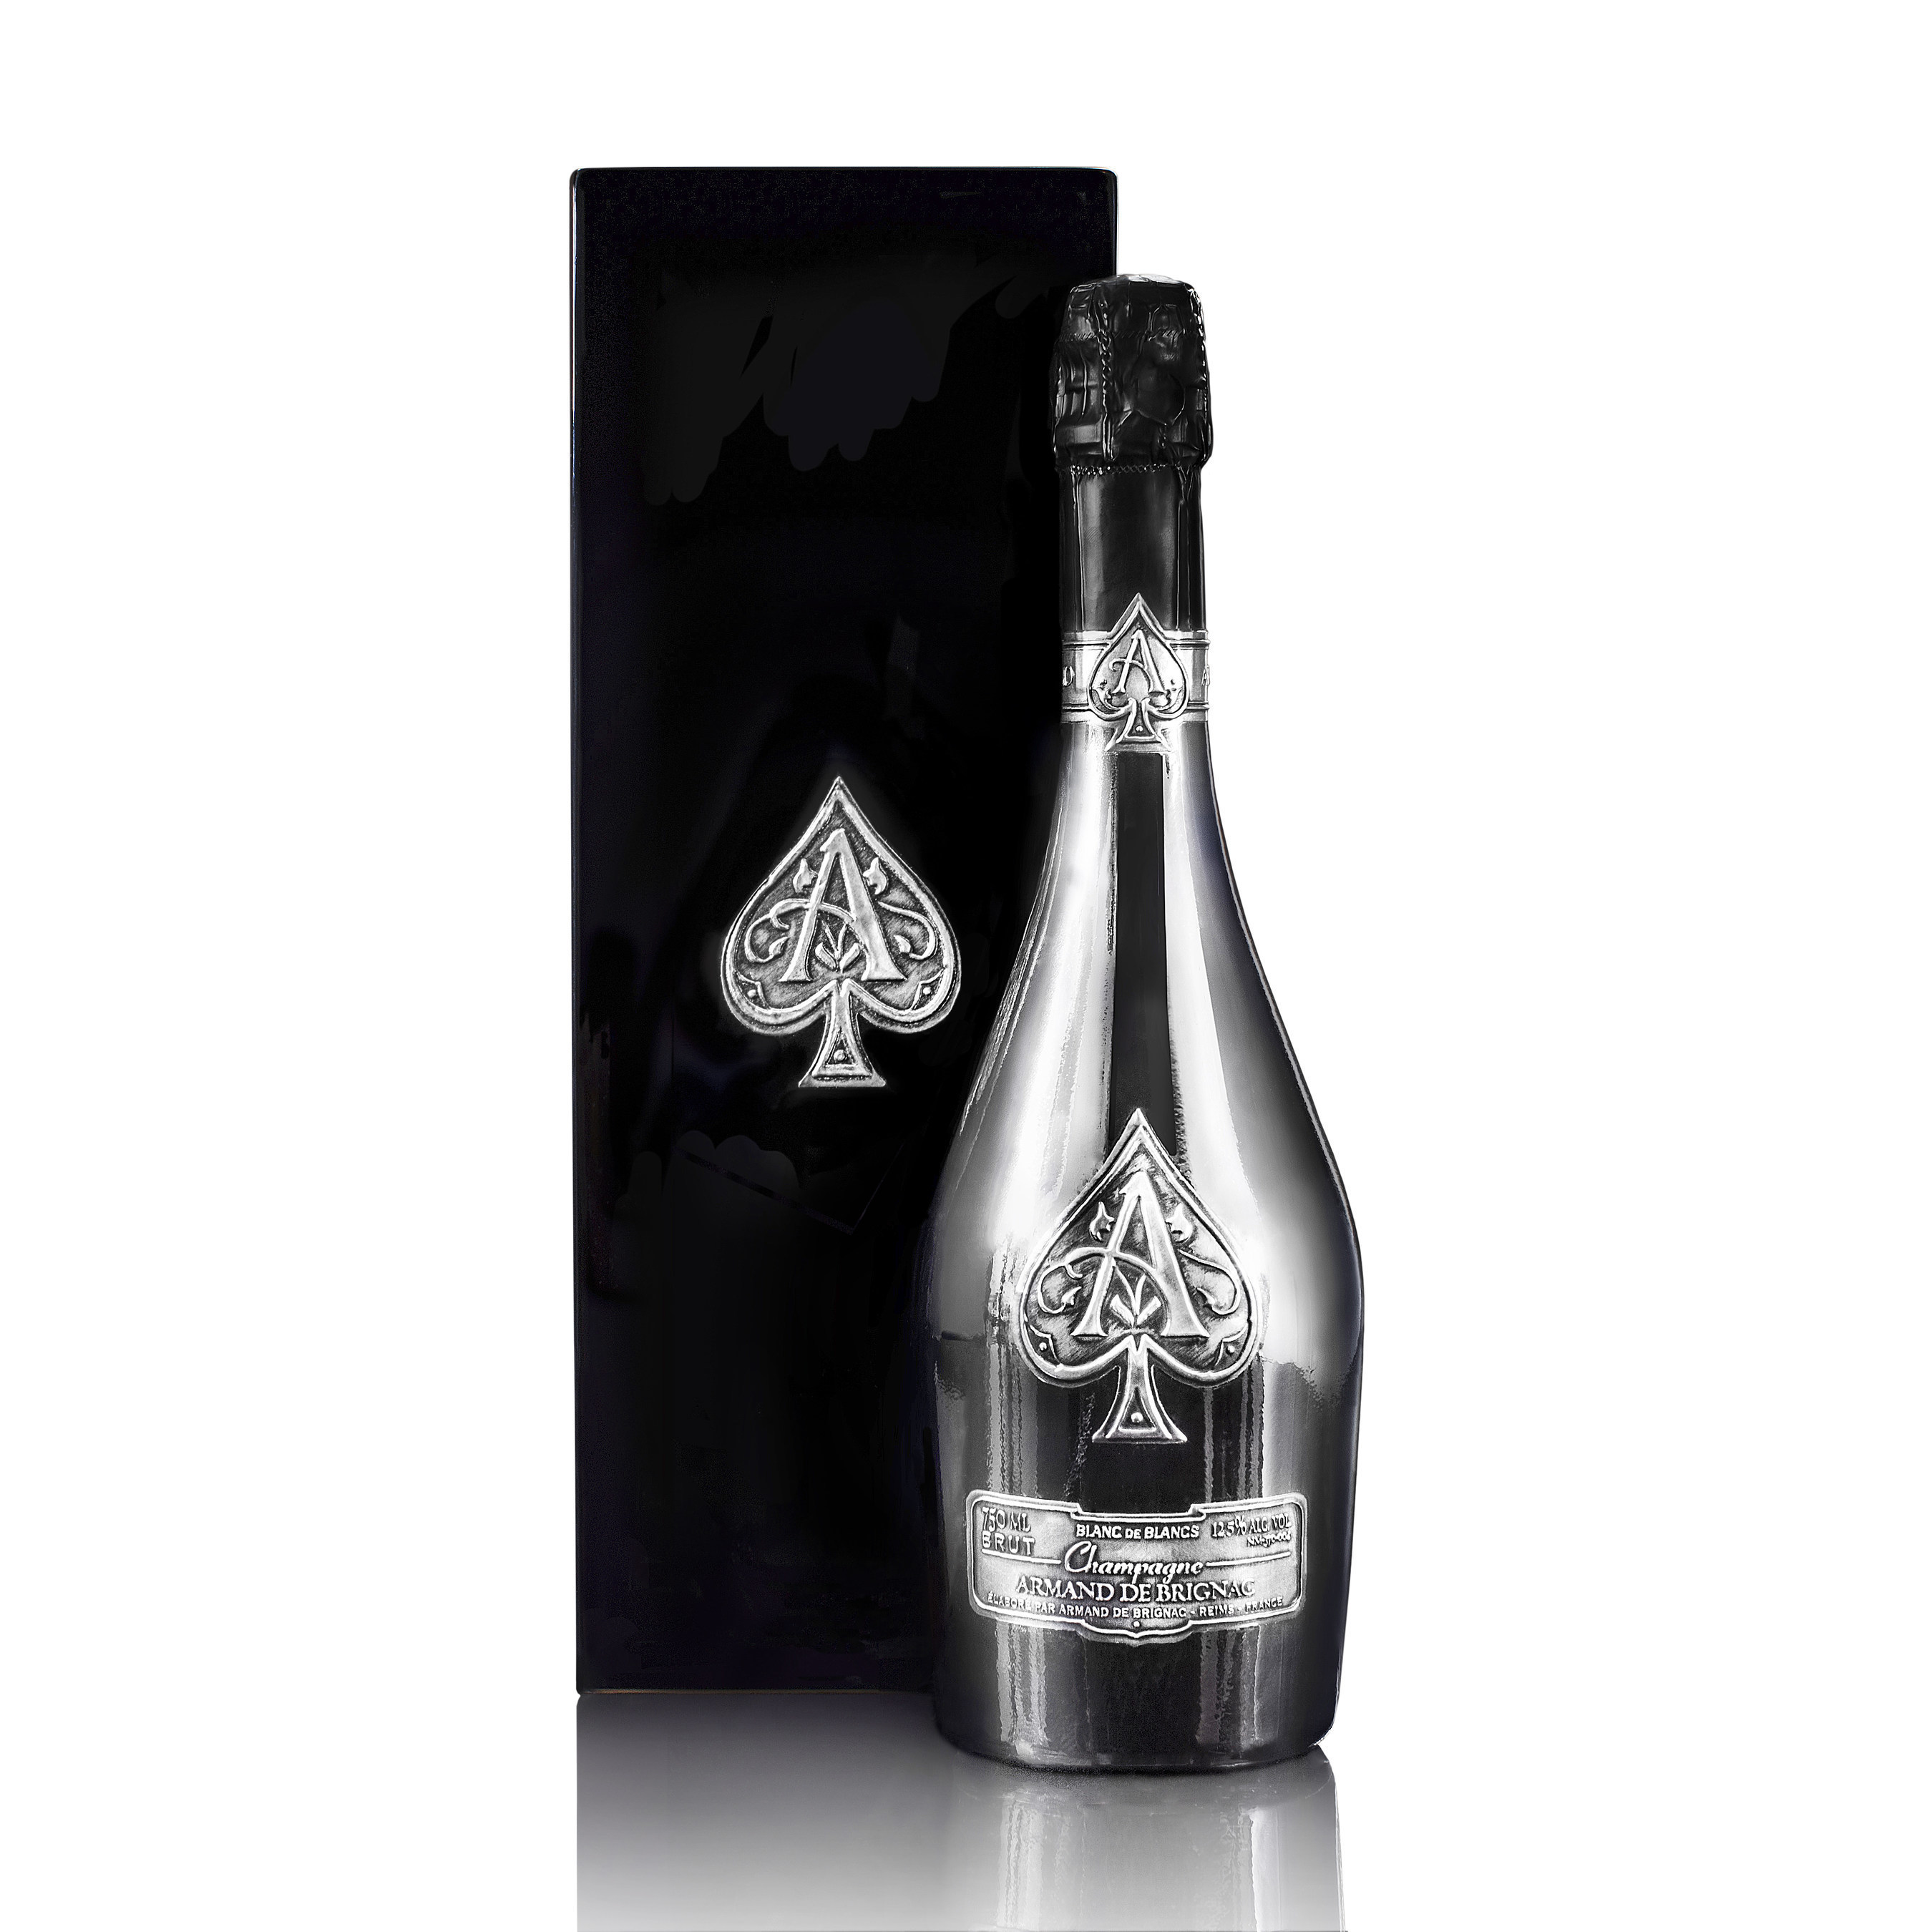 Jay Z is the official owner of Armand de Brignac (Ace of Spades